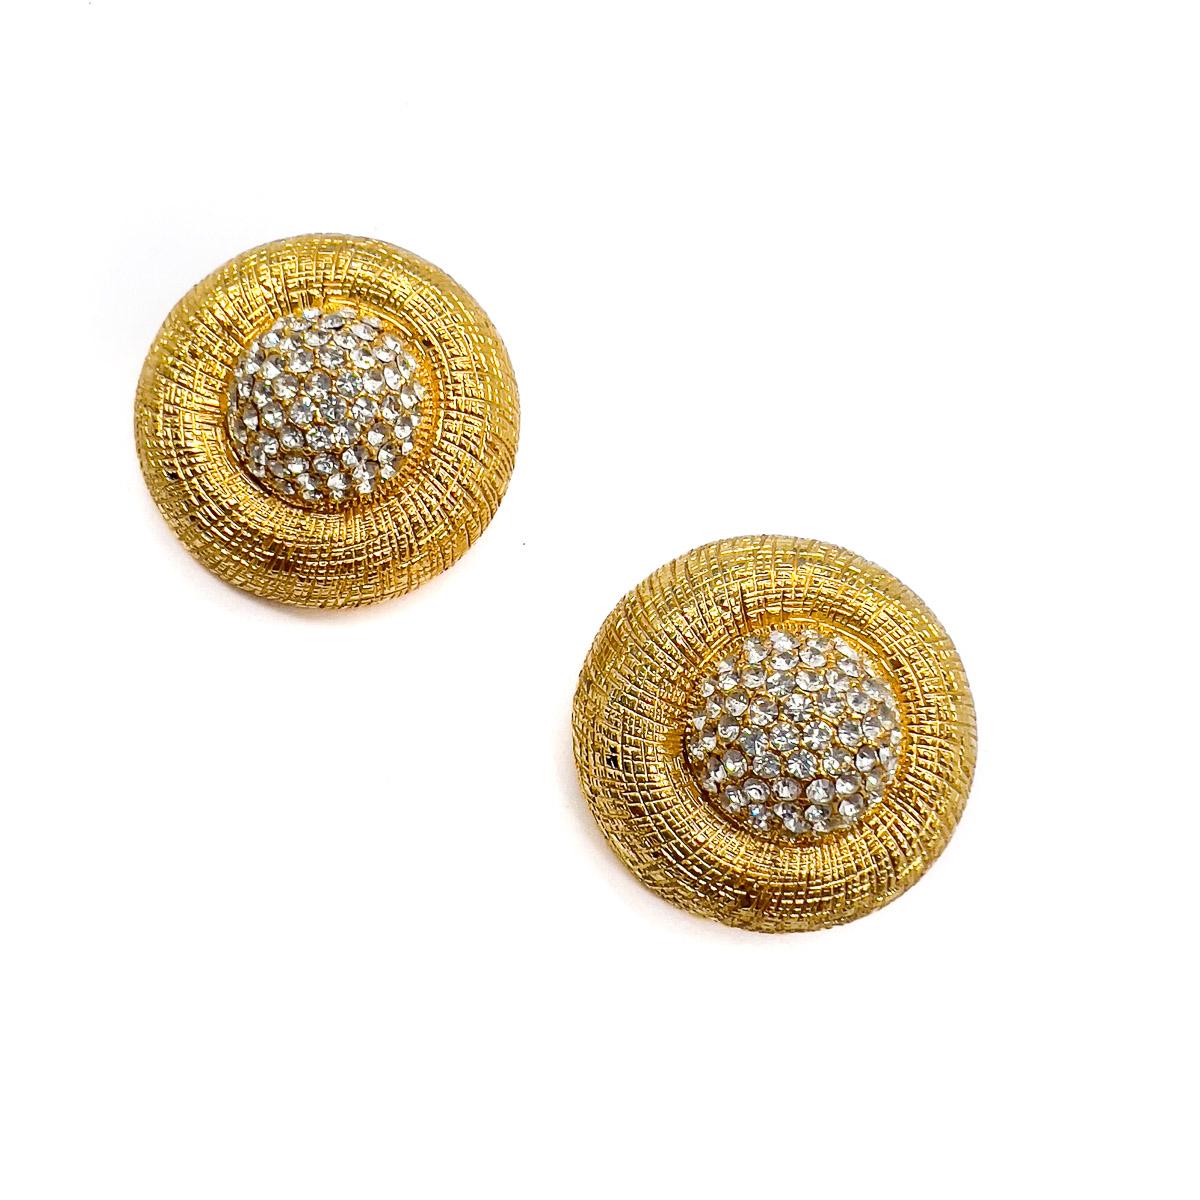 A pair of vintage etched Gold Crystal Earrings. A stunning find, lustrous gold mounts surrounds pave crystal set domes for the ultimate in statement chic.

An unsigned beauty. A rare treasure. Just because a jewel doesn’t carry a designer name,